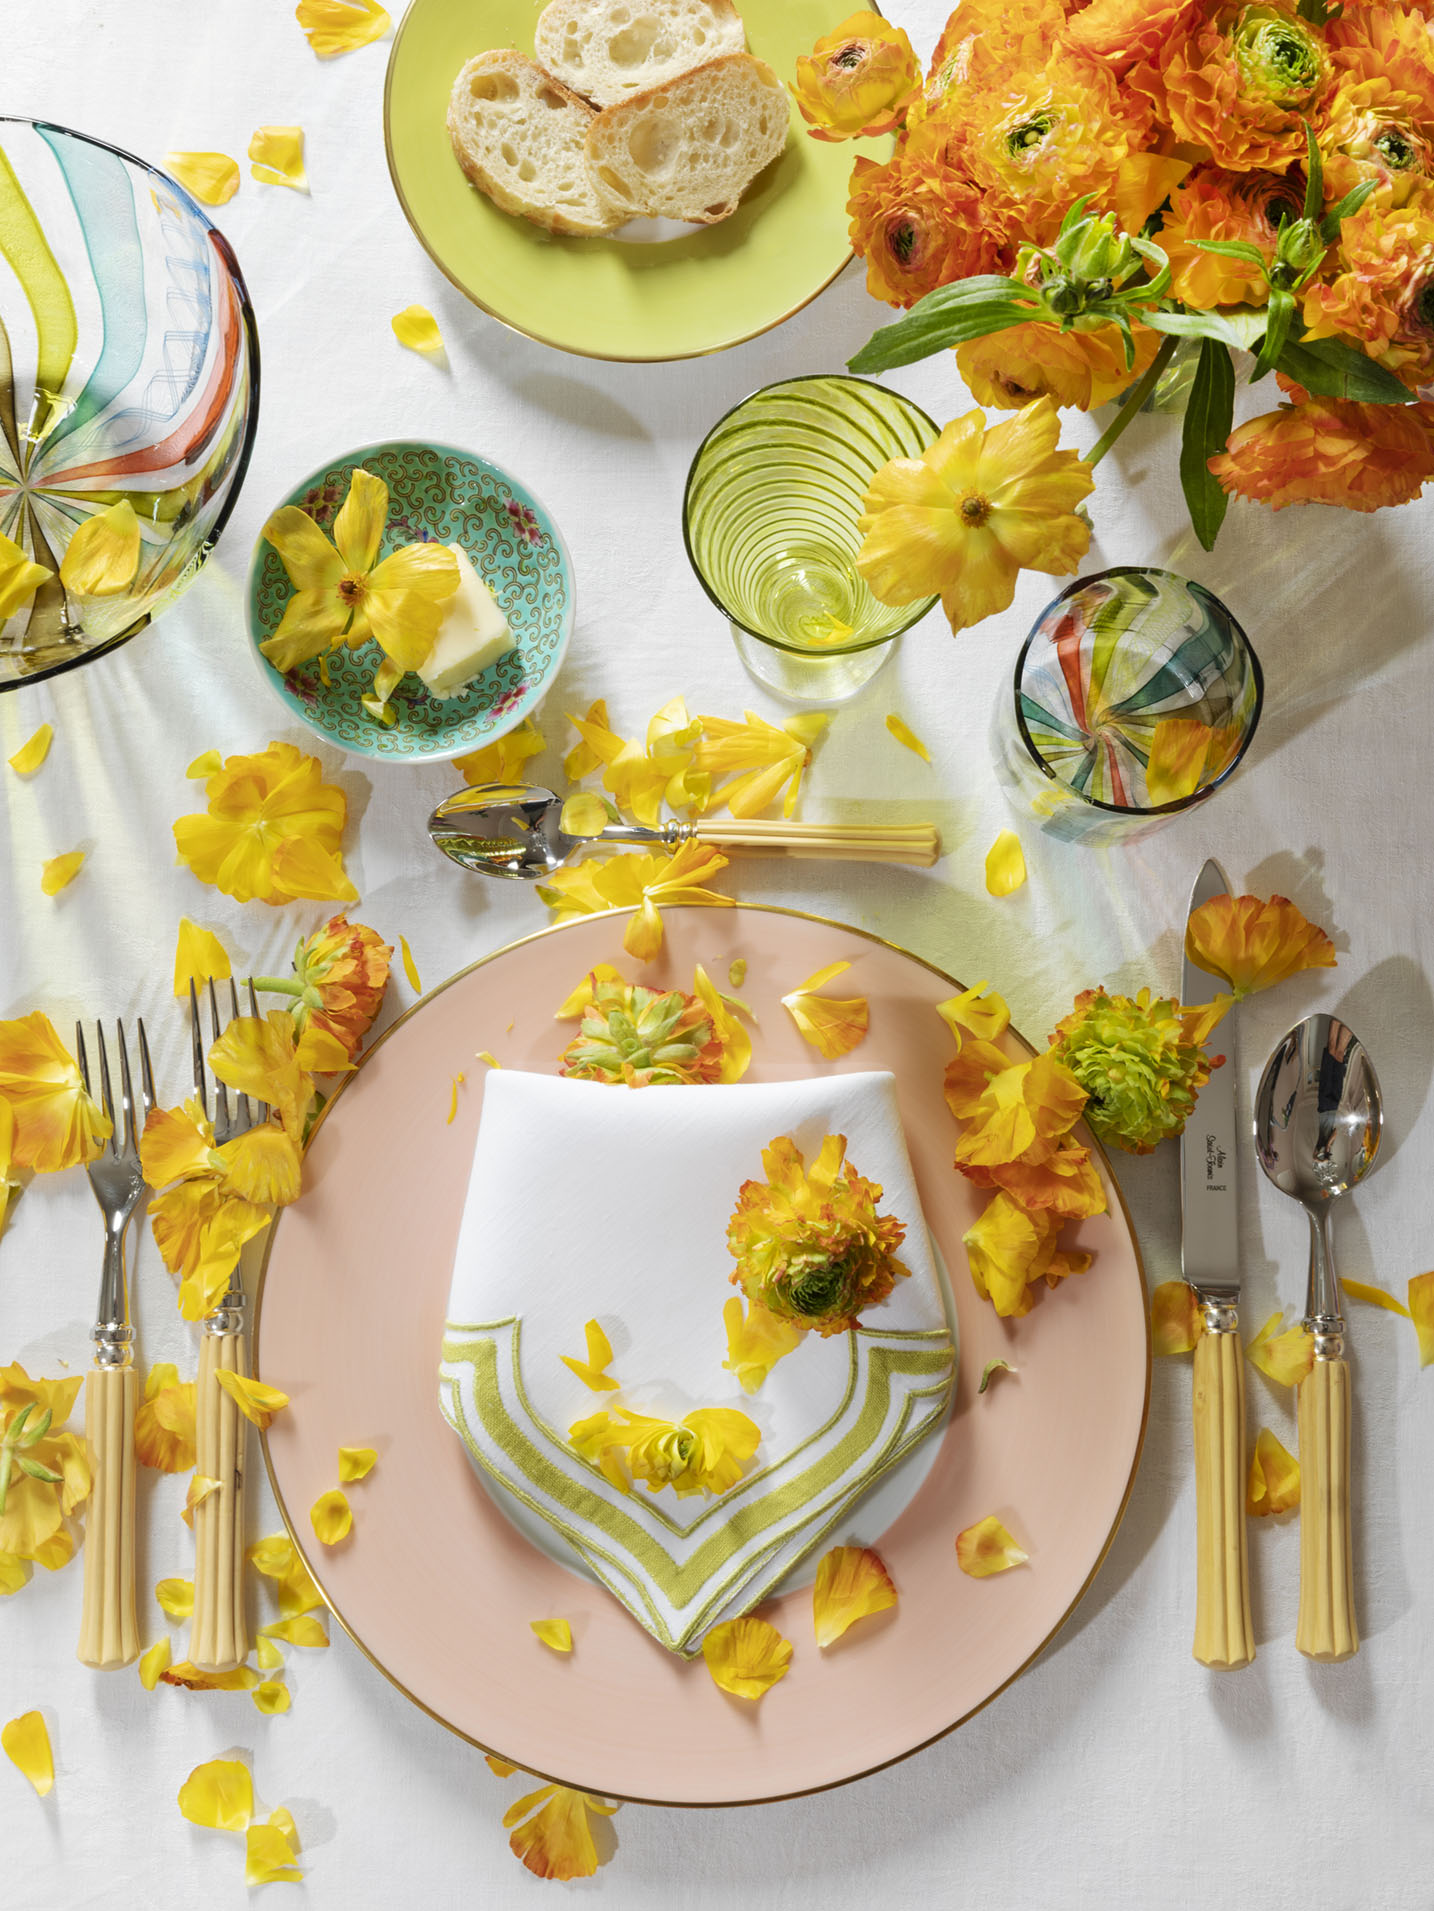 summer table from Rebecca Gardner's Houses & Parties featuring dinnerware in peach, green, and teal, with vibrant yellow and orange flowers